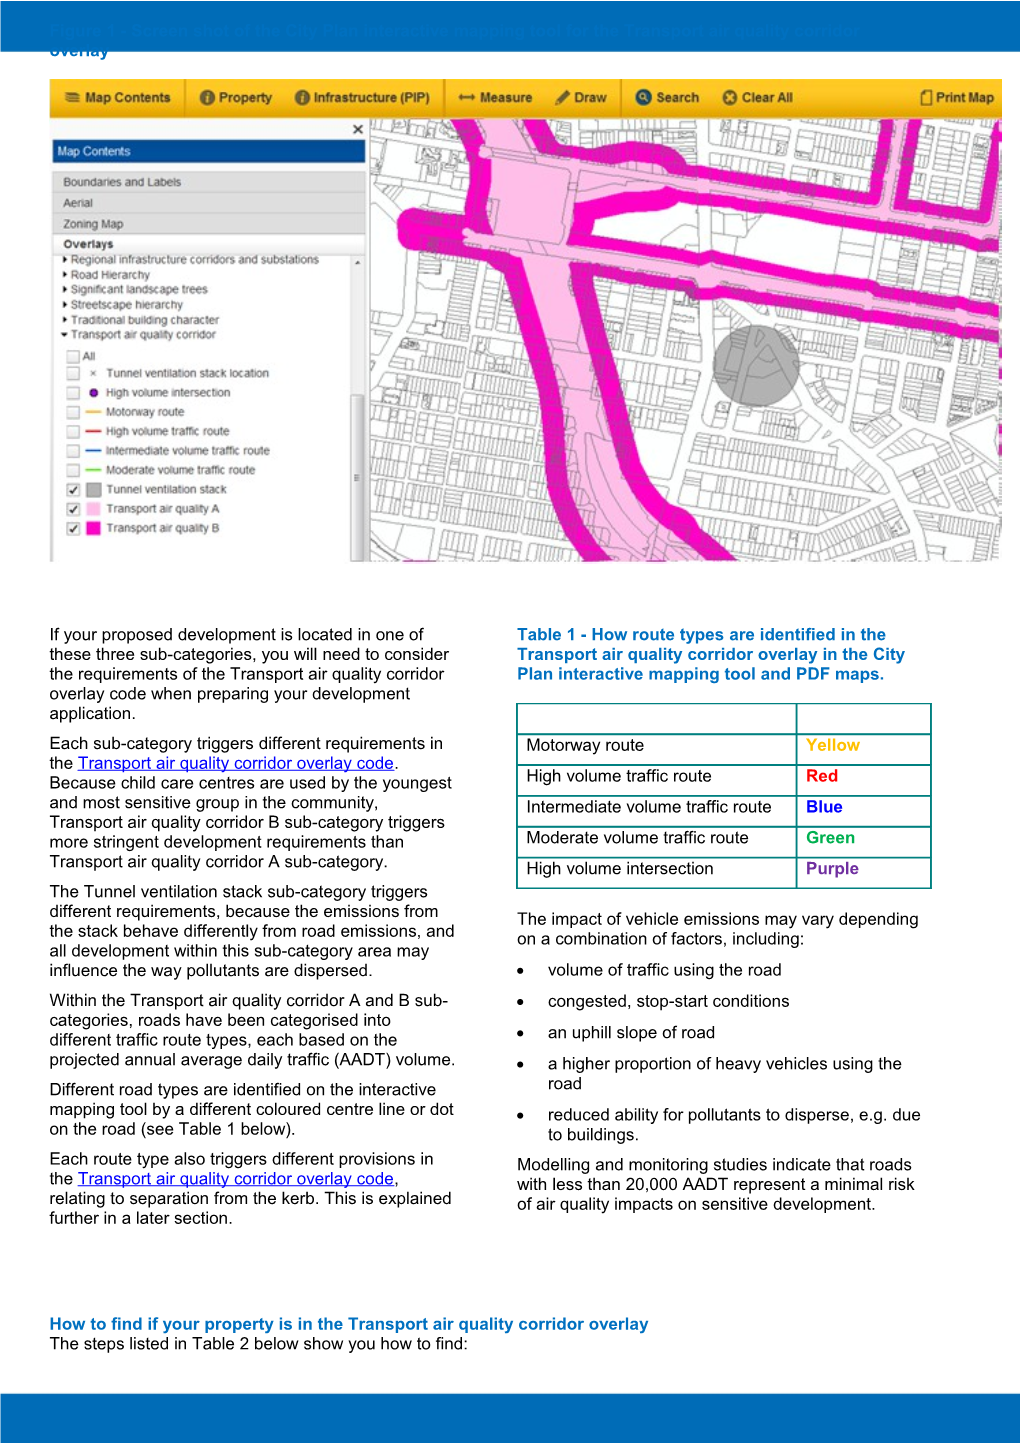 12. Guide to Development in the Transport Air Quality Corridor Overlay